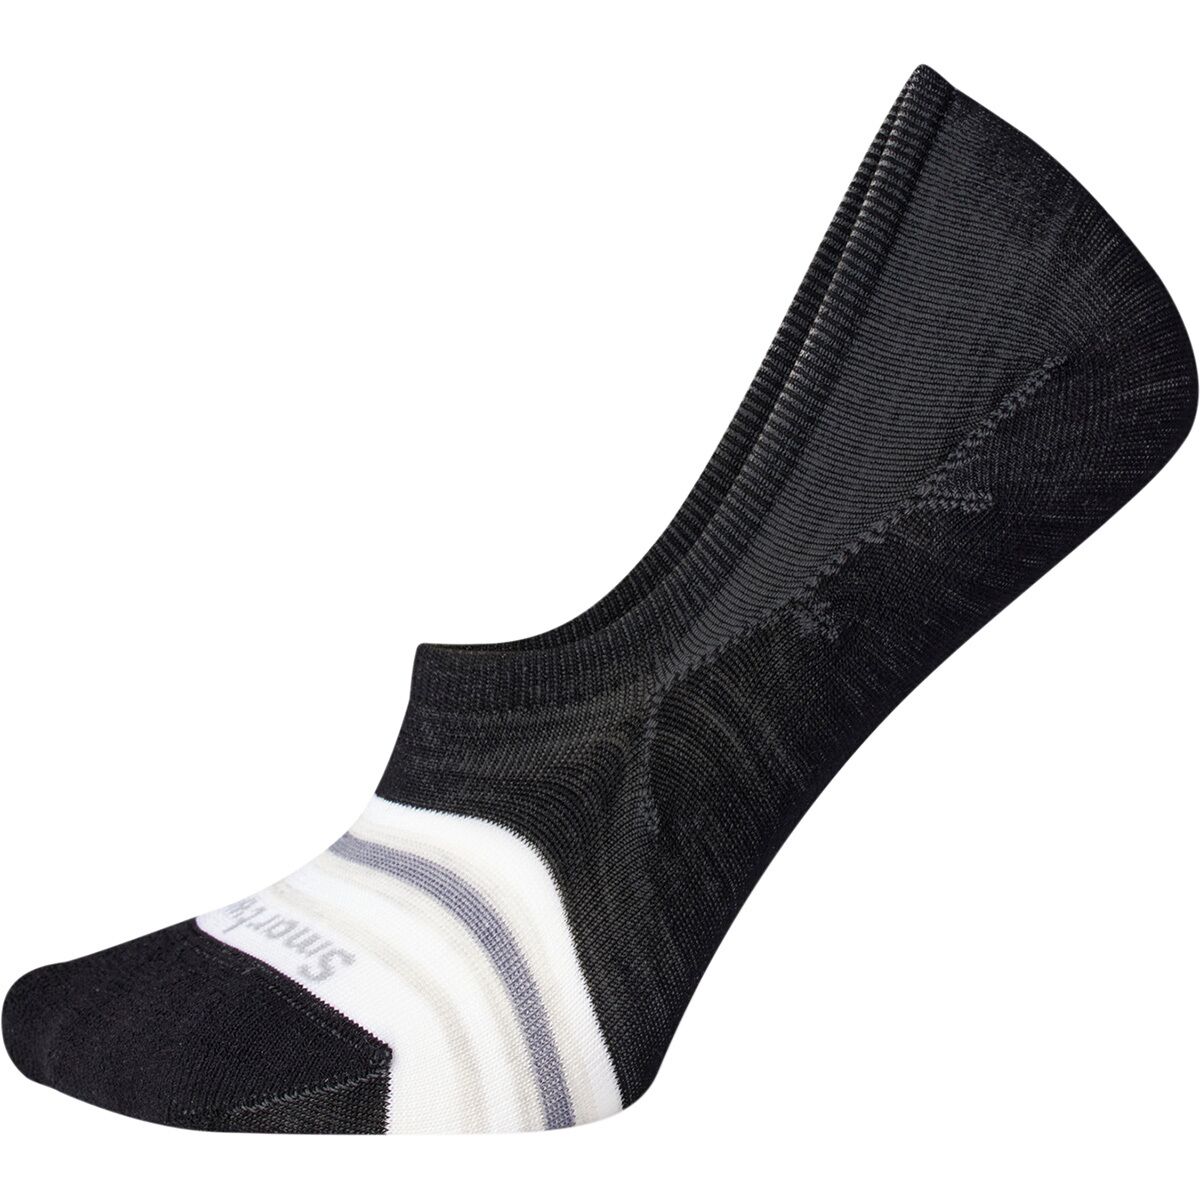 Smartwool Everyday Striped No Show Sock - Women's